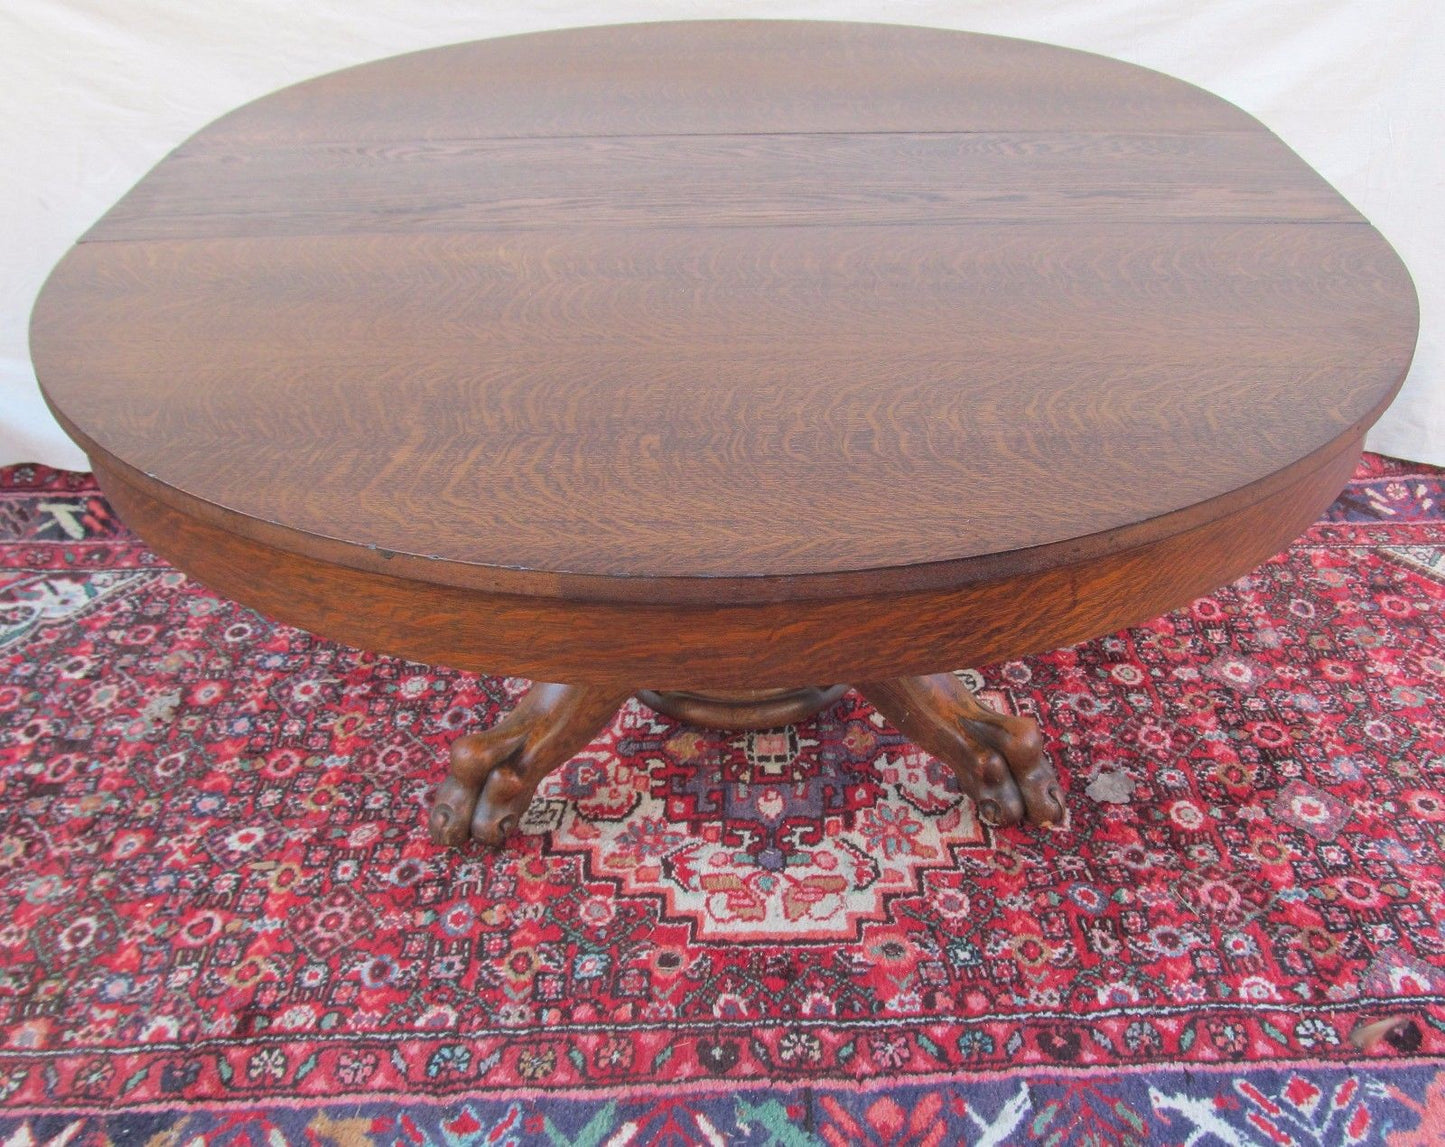 EXTRA CHOICE VICTORIAN TIGER OAK DINING TABLE WITH LION PAW BASE BY LARKIN